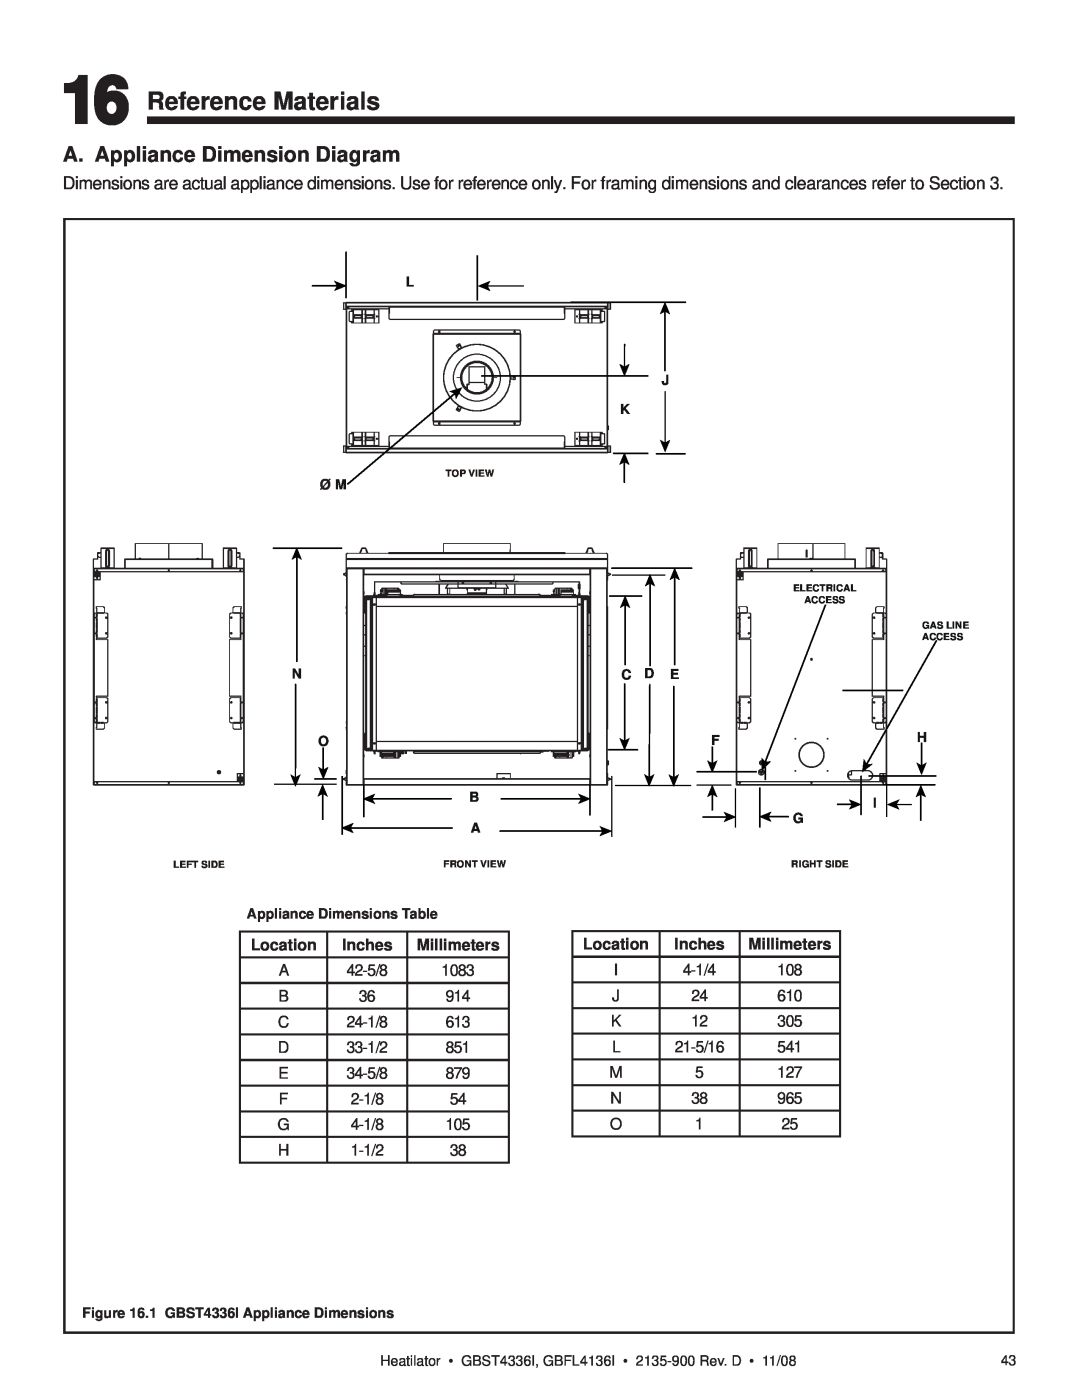 Hearth and Home Technologies GBST4336I Reference Materials, A. Appliance Dimension Diagram, Location, Inches, Millimeters 